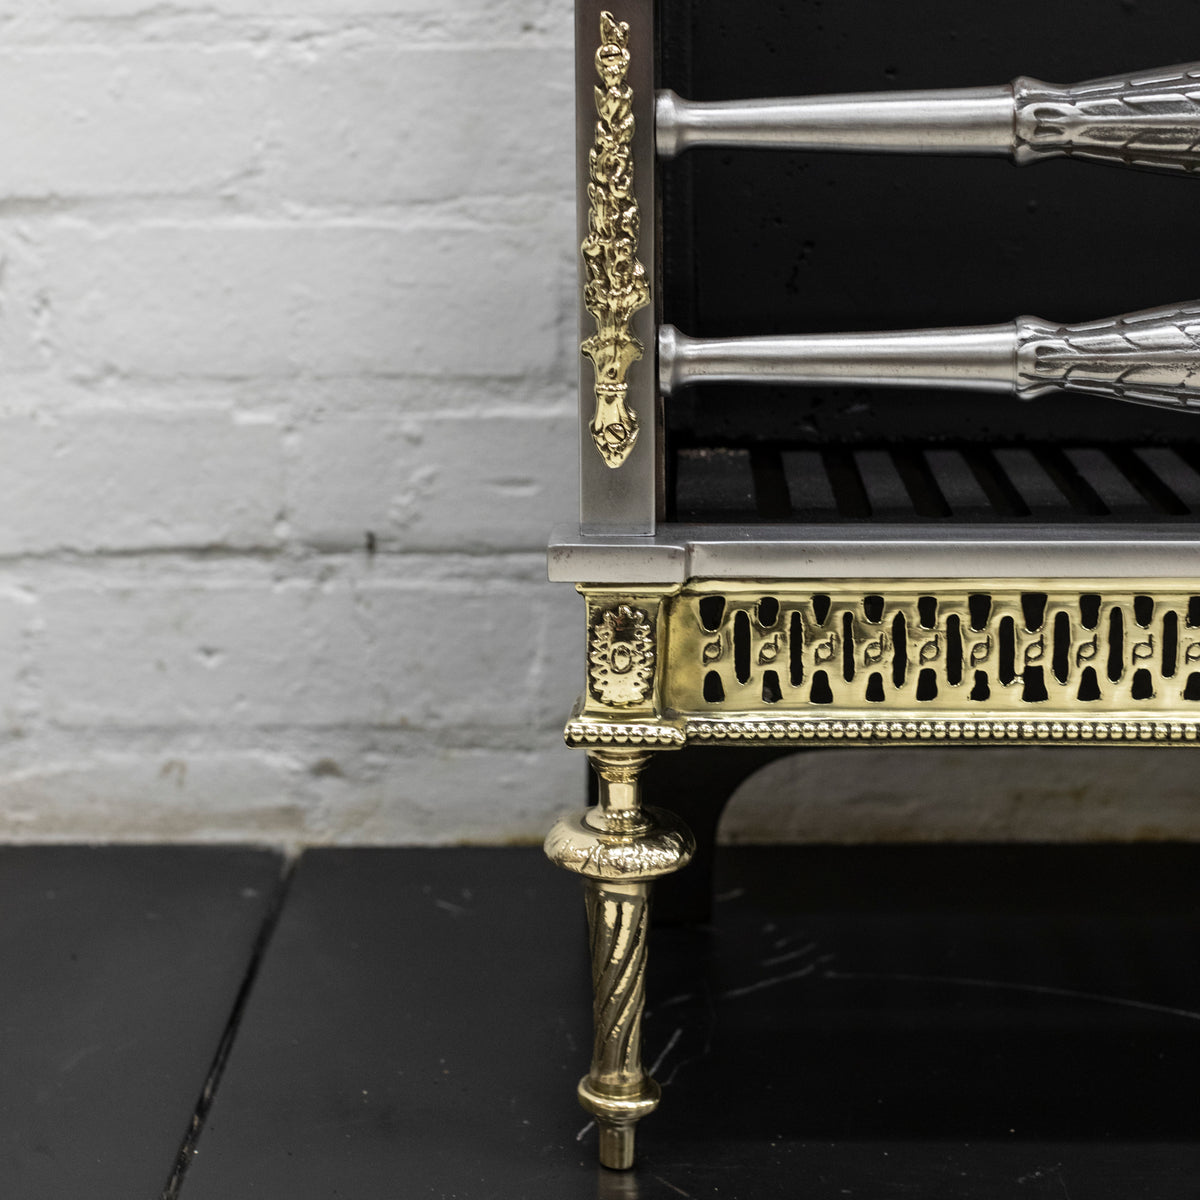 Antique Reclaimed Ornate Fire Basket With Acorn Finials | Pair Available | The Architectural Forum